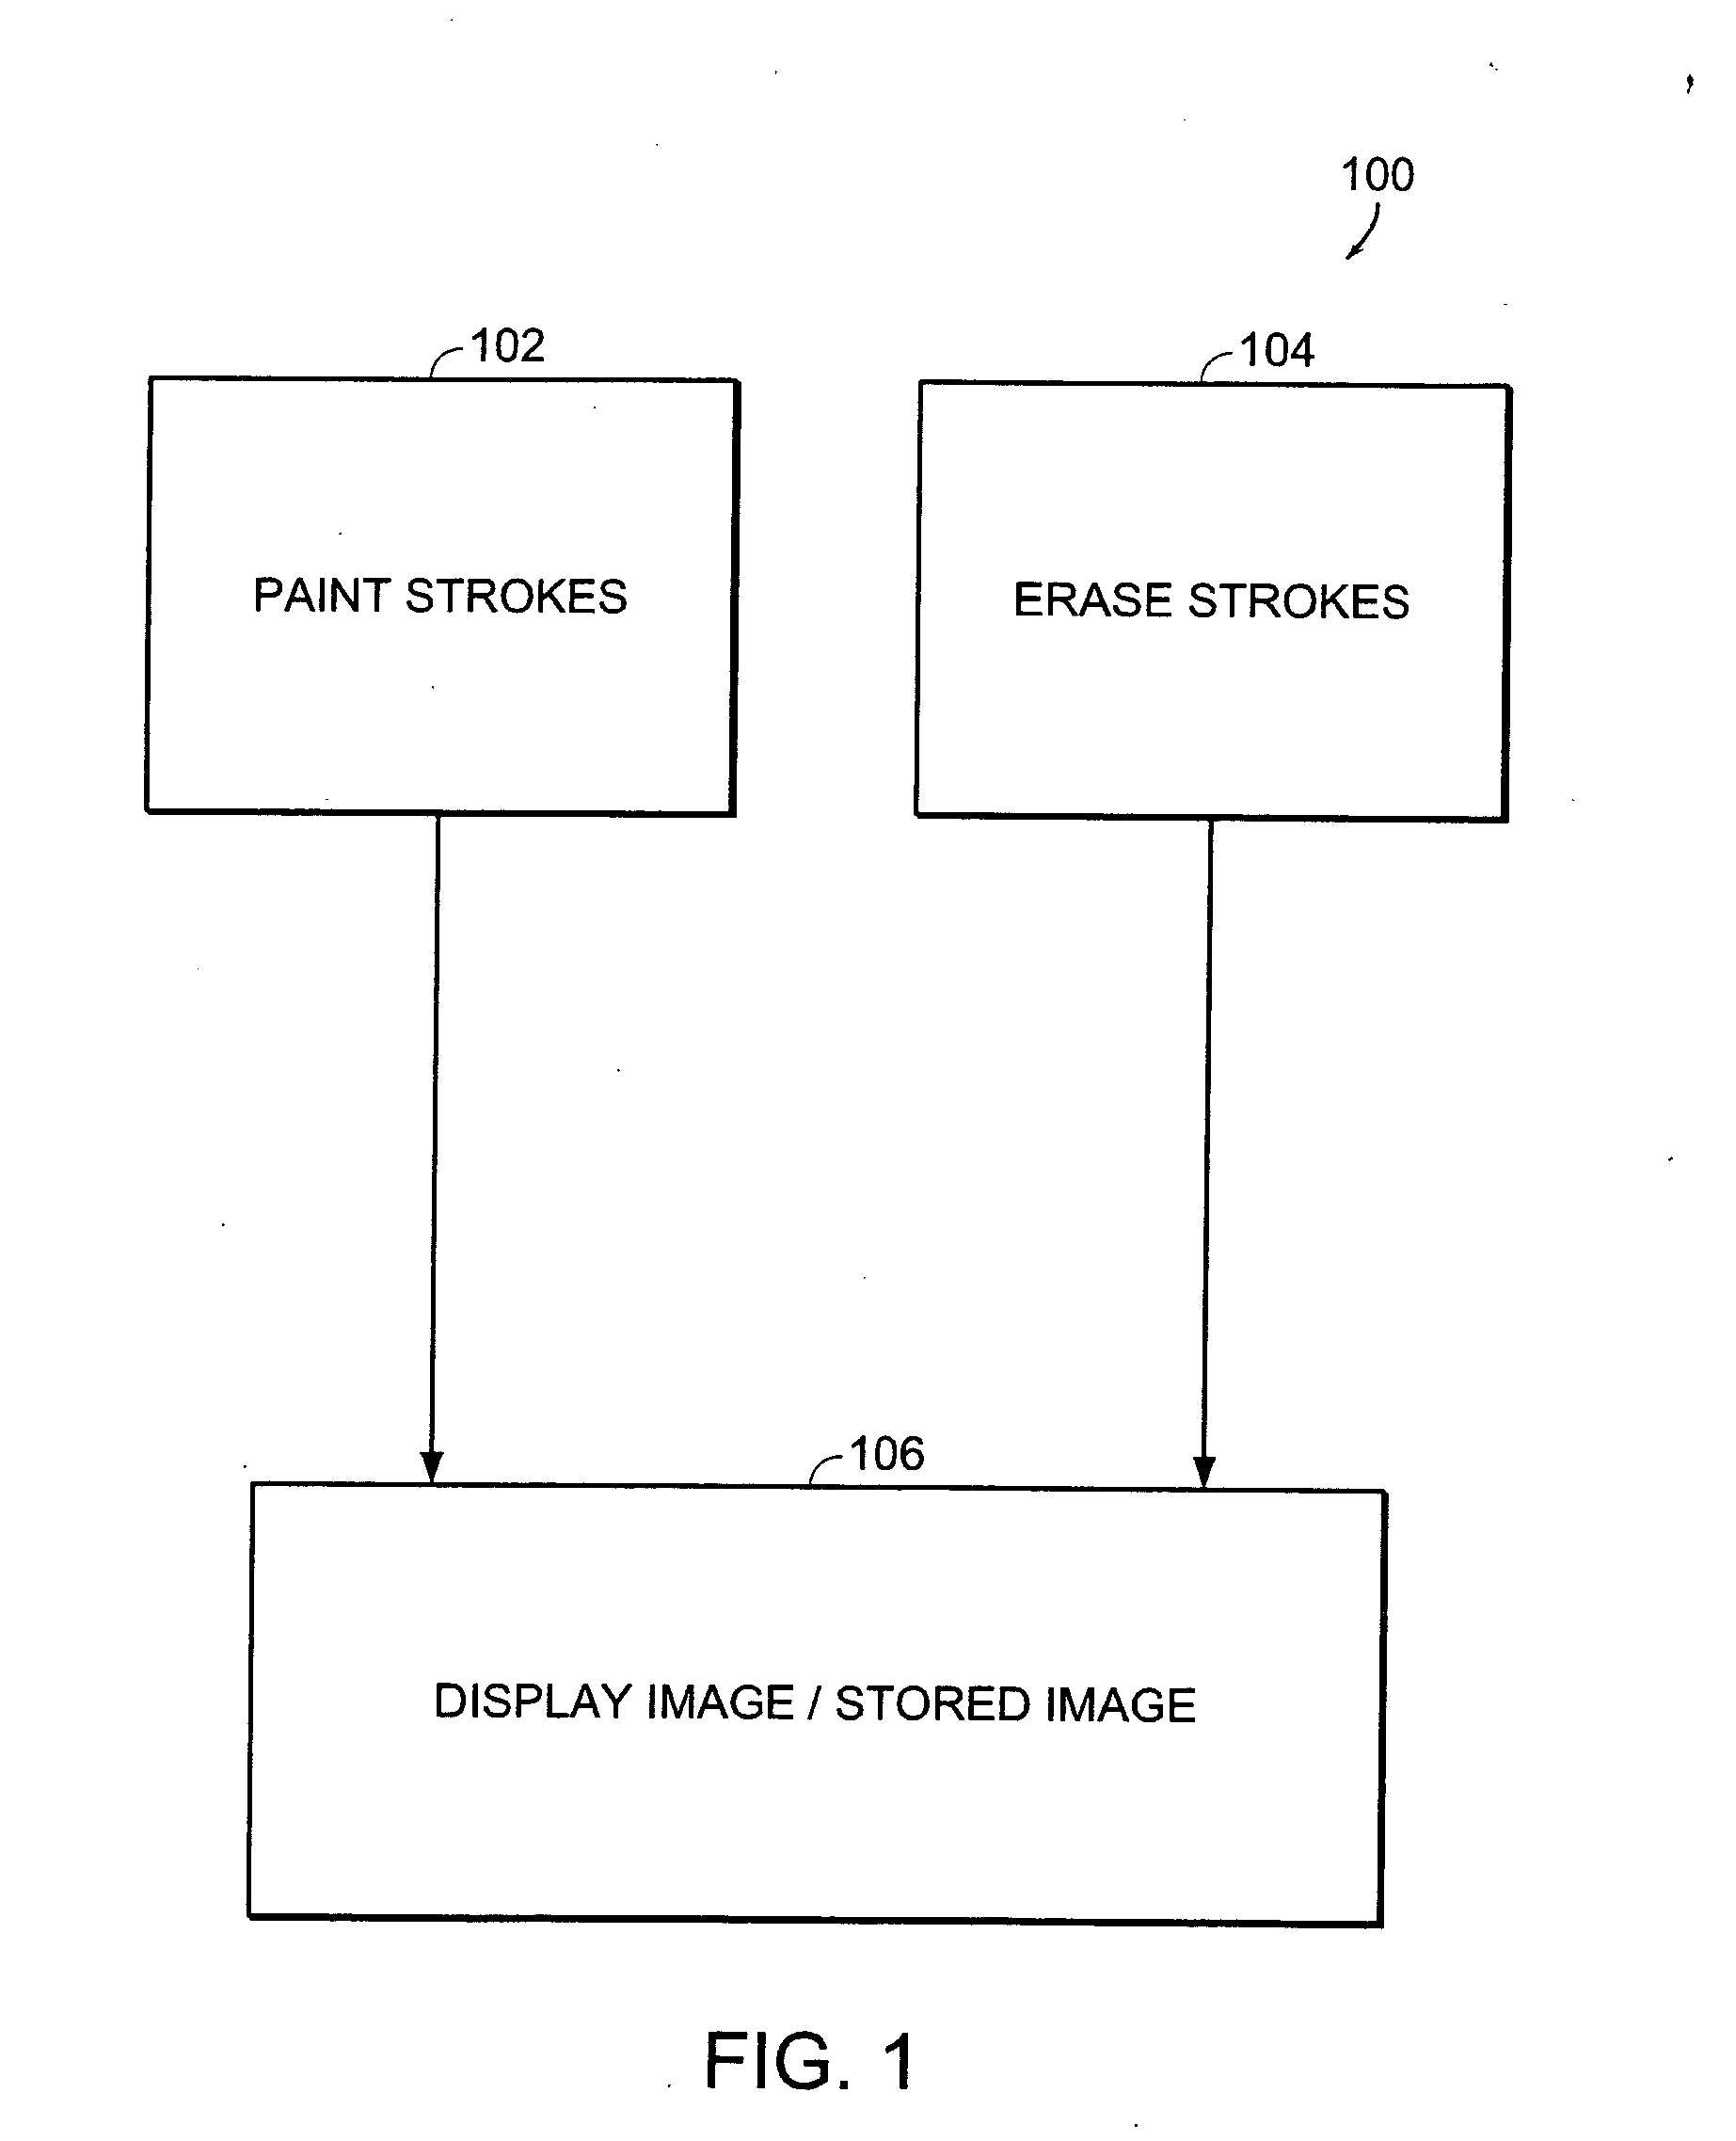 Apparatus and methods for stenciling an image